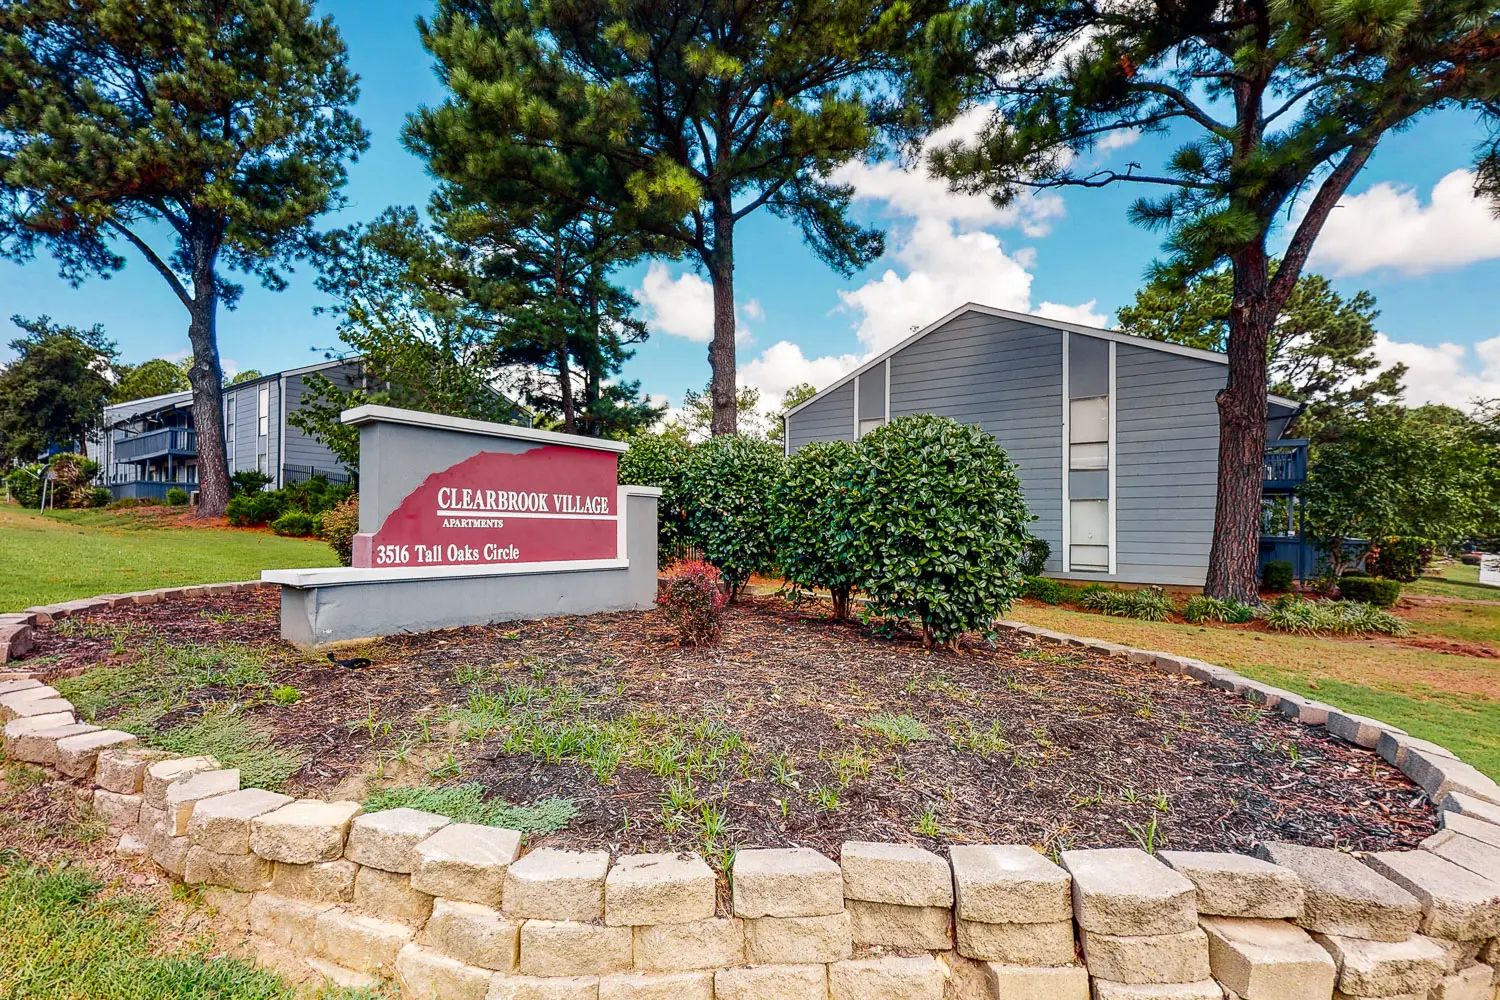 Clearbrook Village Apartments